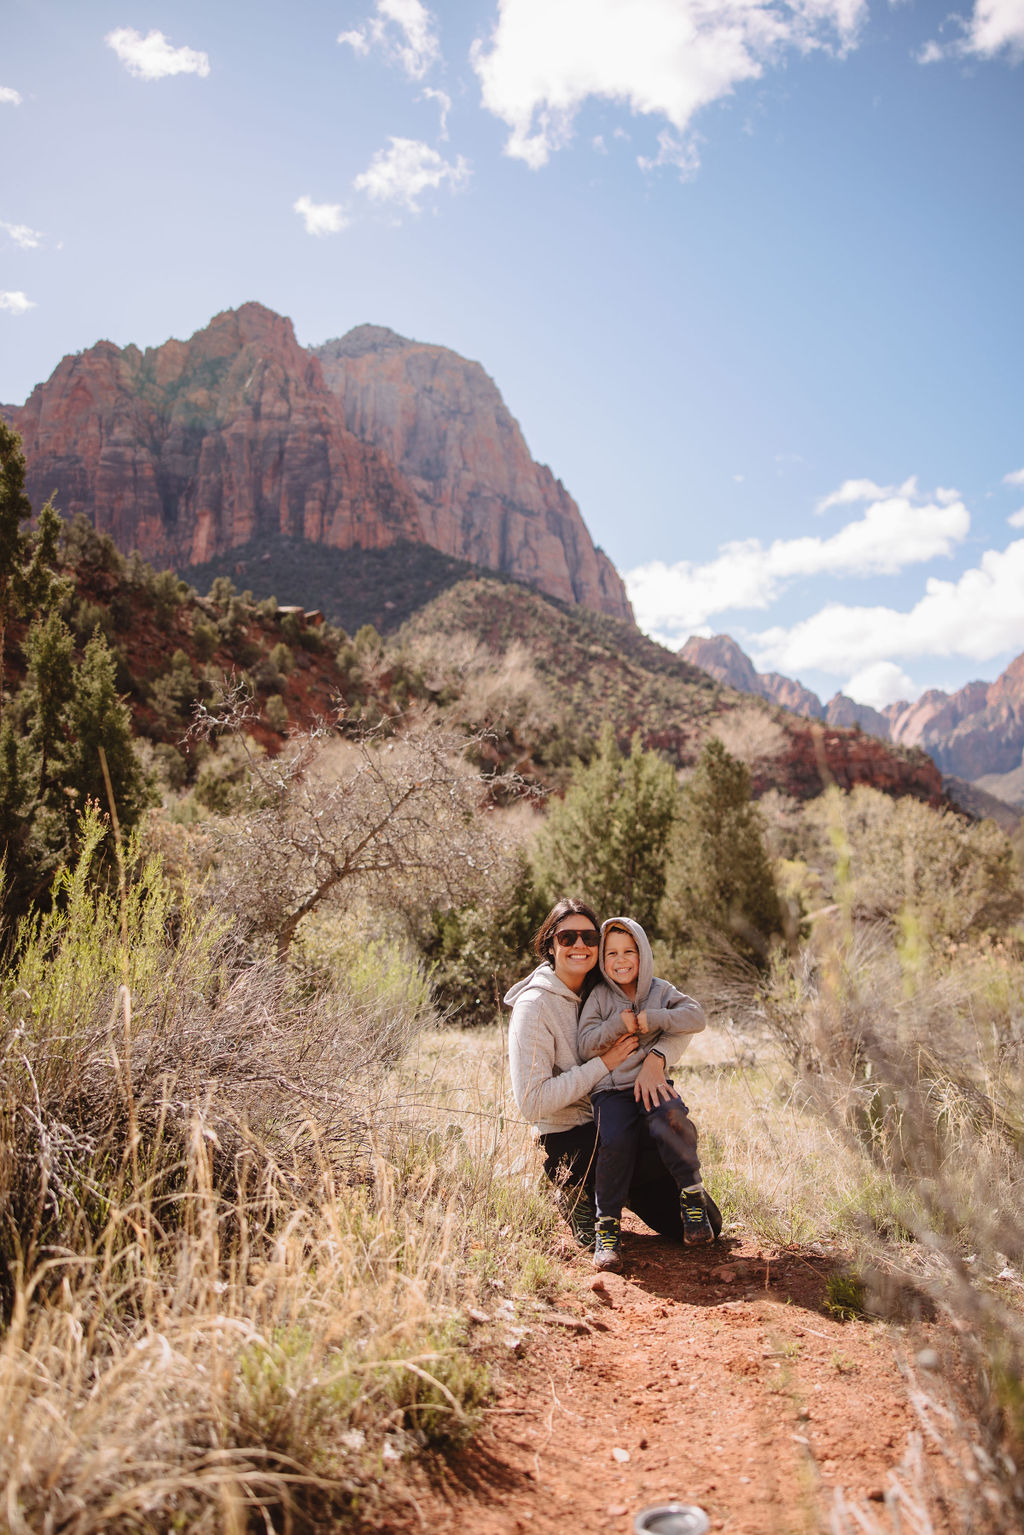 A family standing on a road with a scenic mountain backdrop in zion national park.